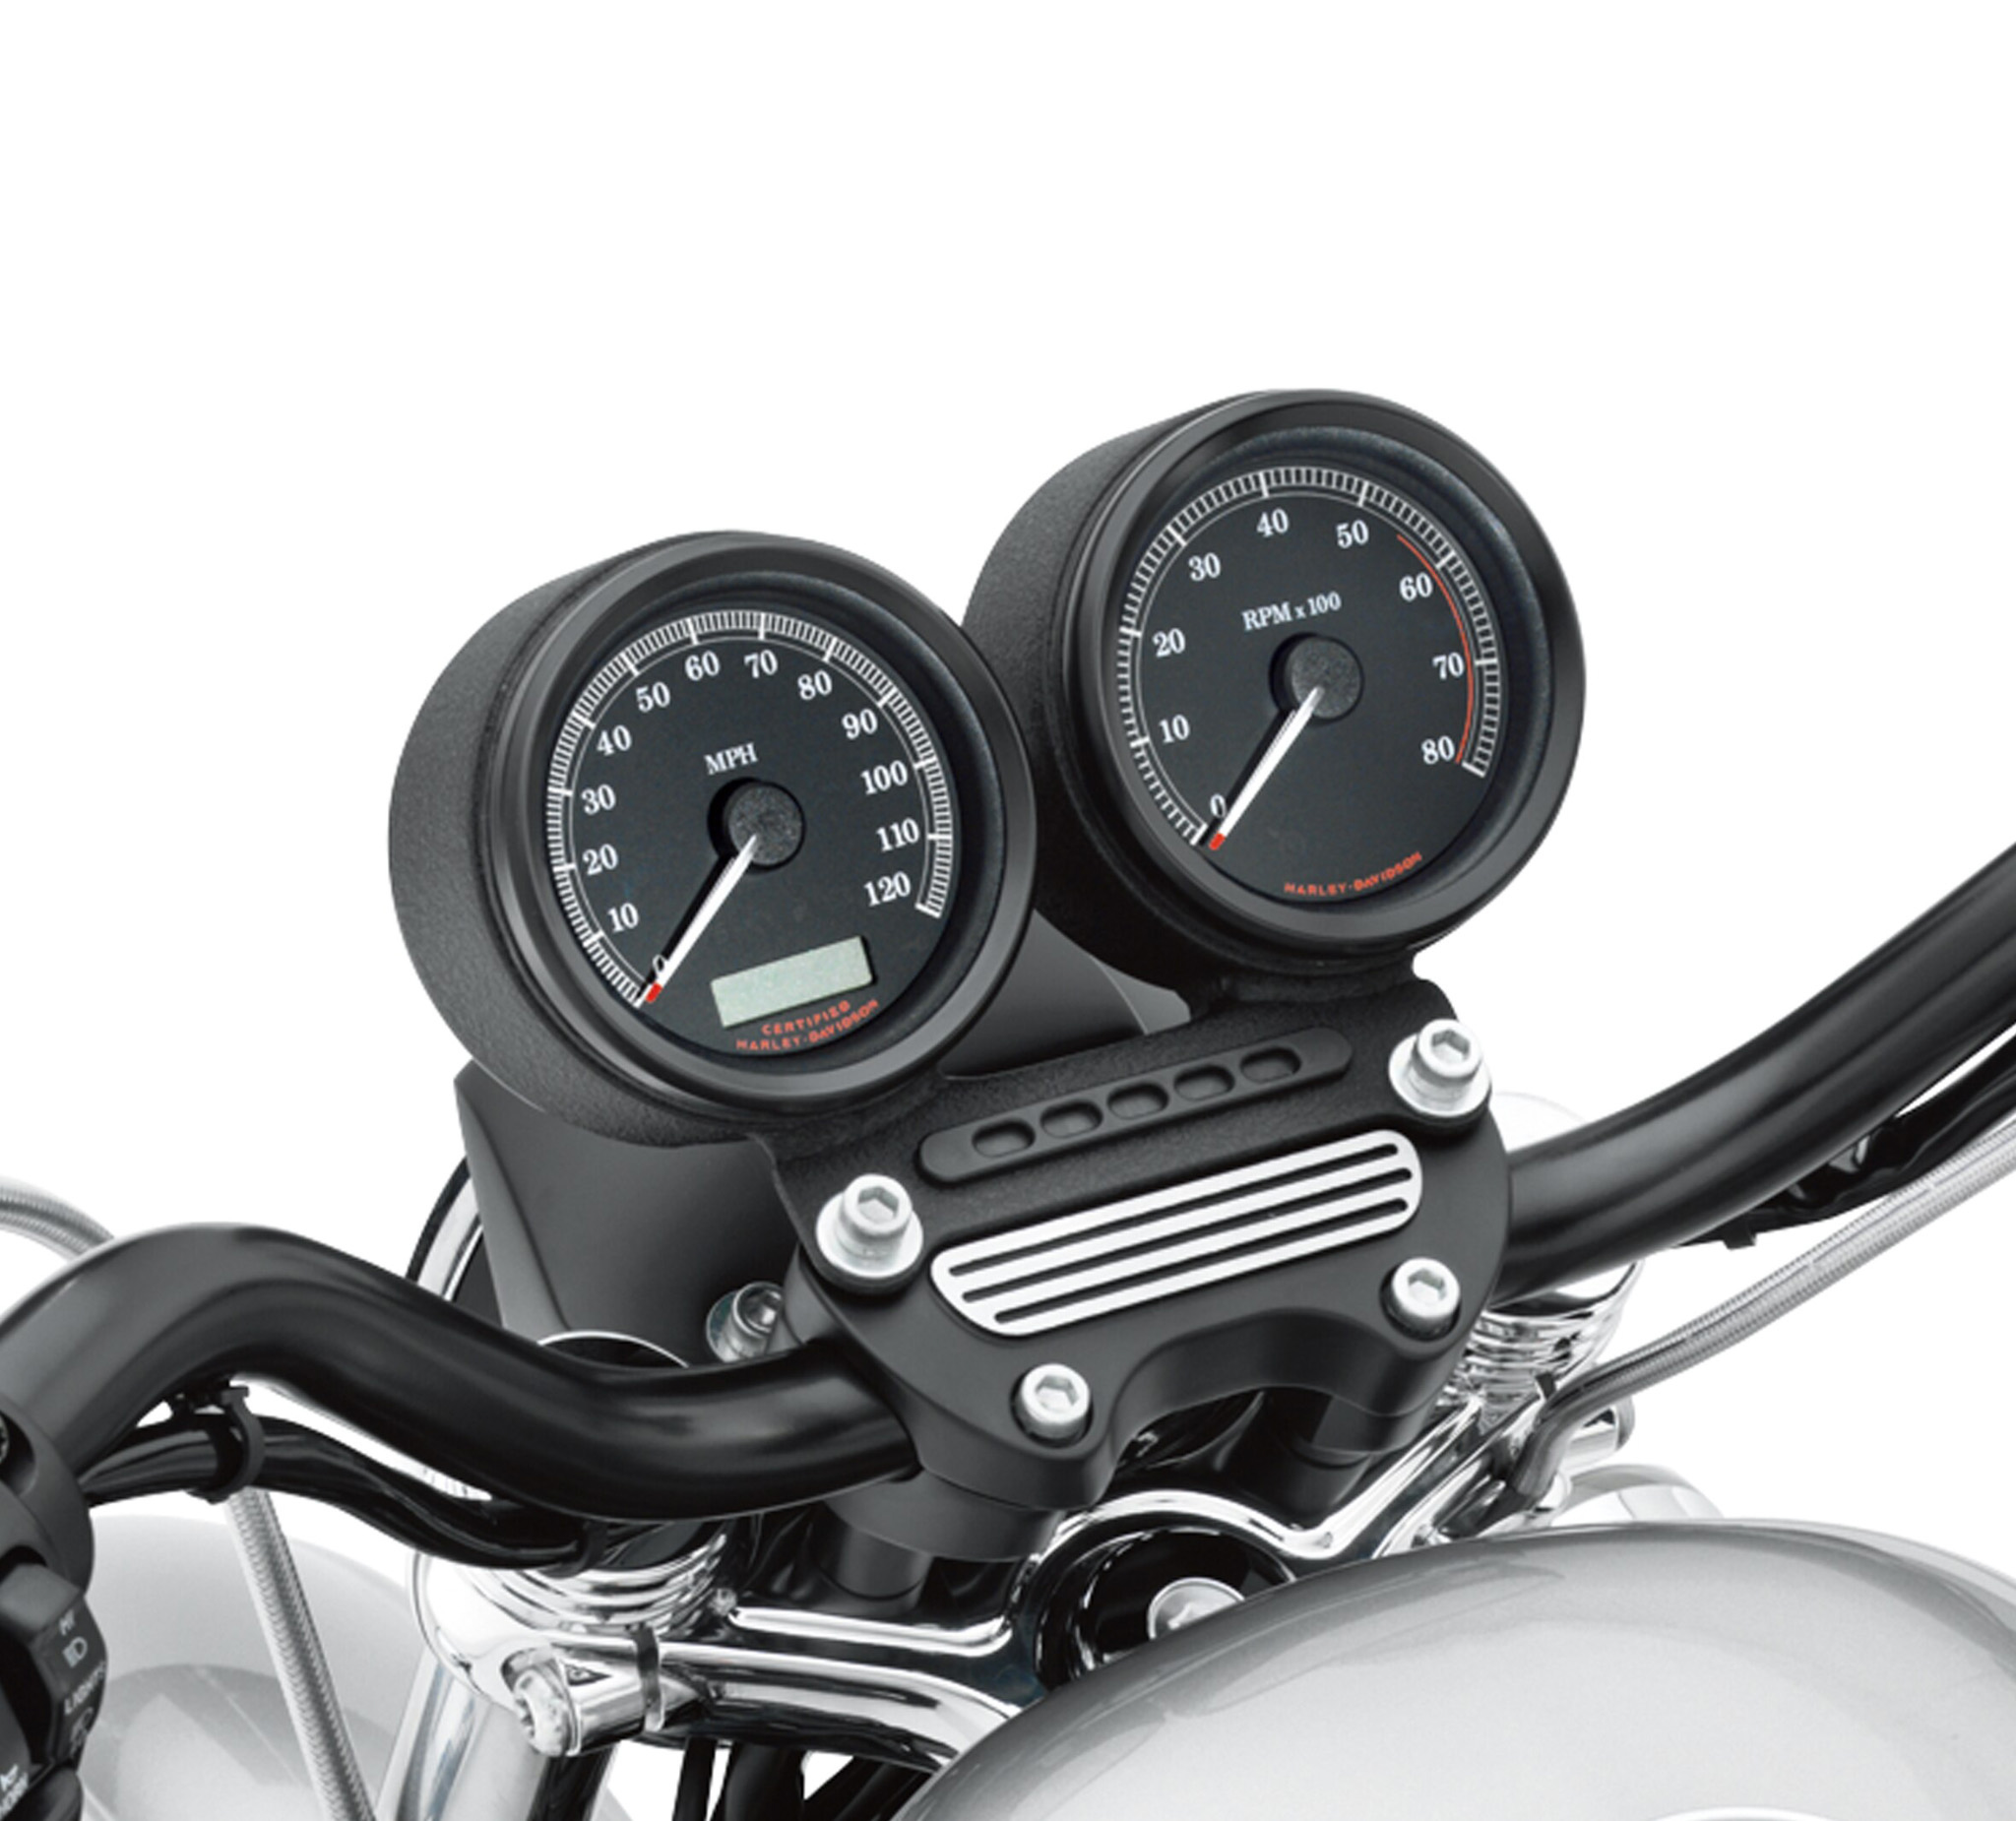 Dual Motorcycle Tach Wiring Diagram from www.harley-davidson.com